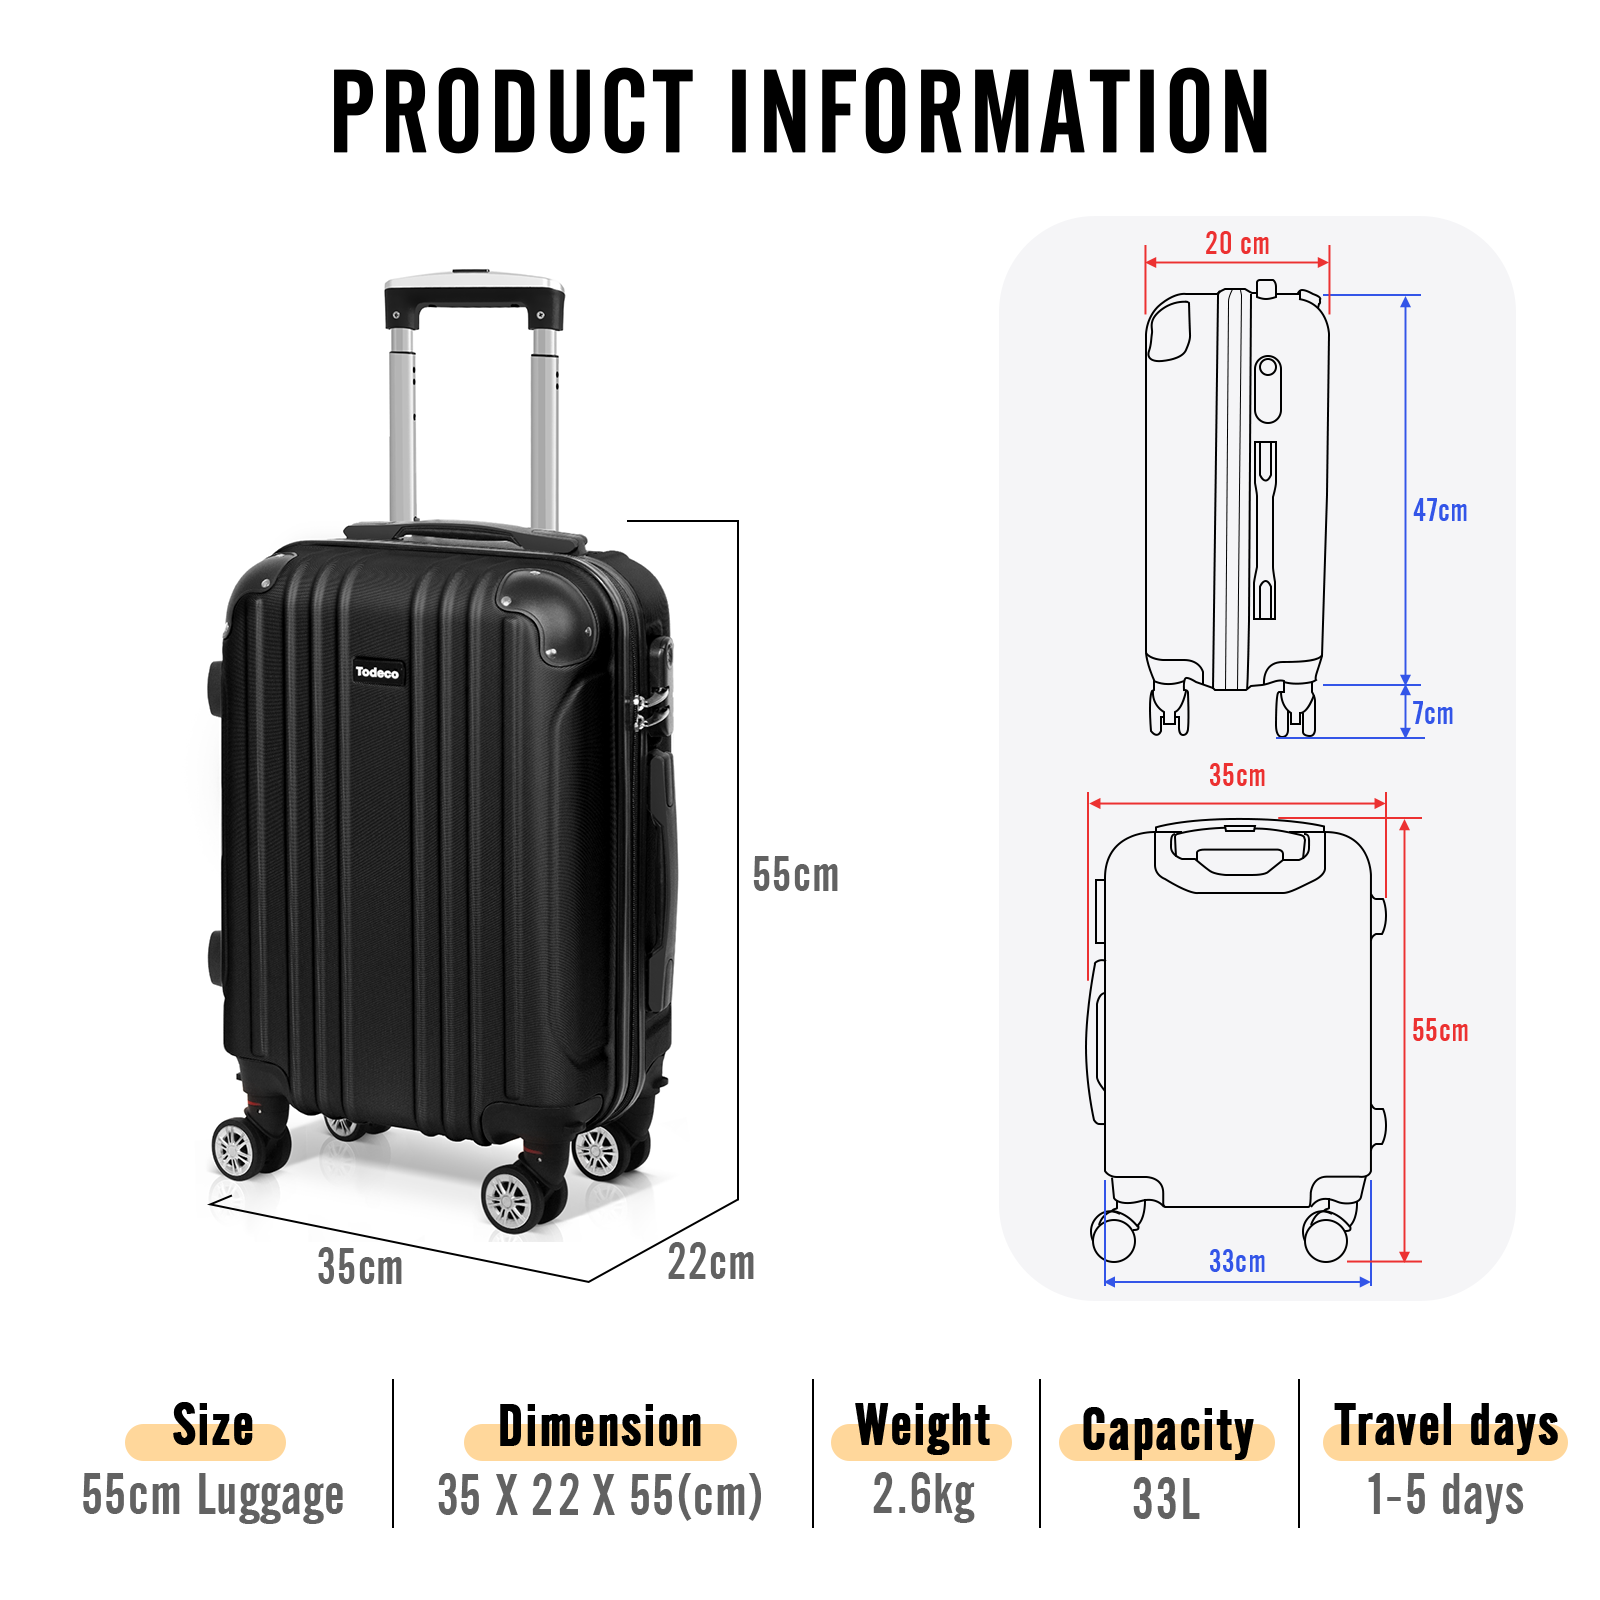 Todeco-Cabin-Suitcase-55cm-Lightweight-Carry-on-Suitcase-with-Hard-Shell-Travel-Suitcase-Rigid-and-Lightweight-ABS-with-4-Double-Wheels-55x35x22cm-Black-Cabin-Suitcase-55cm-Black